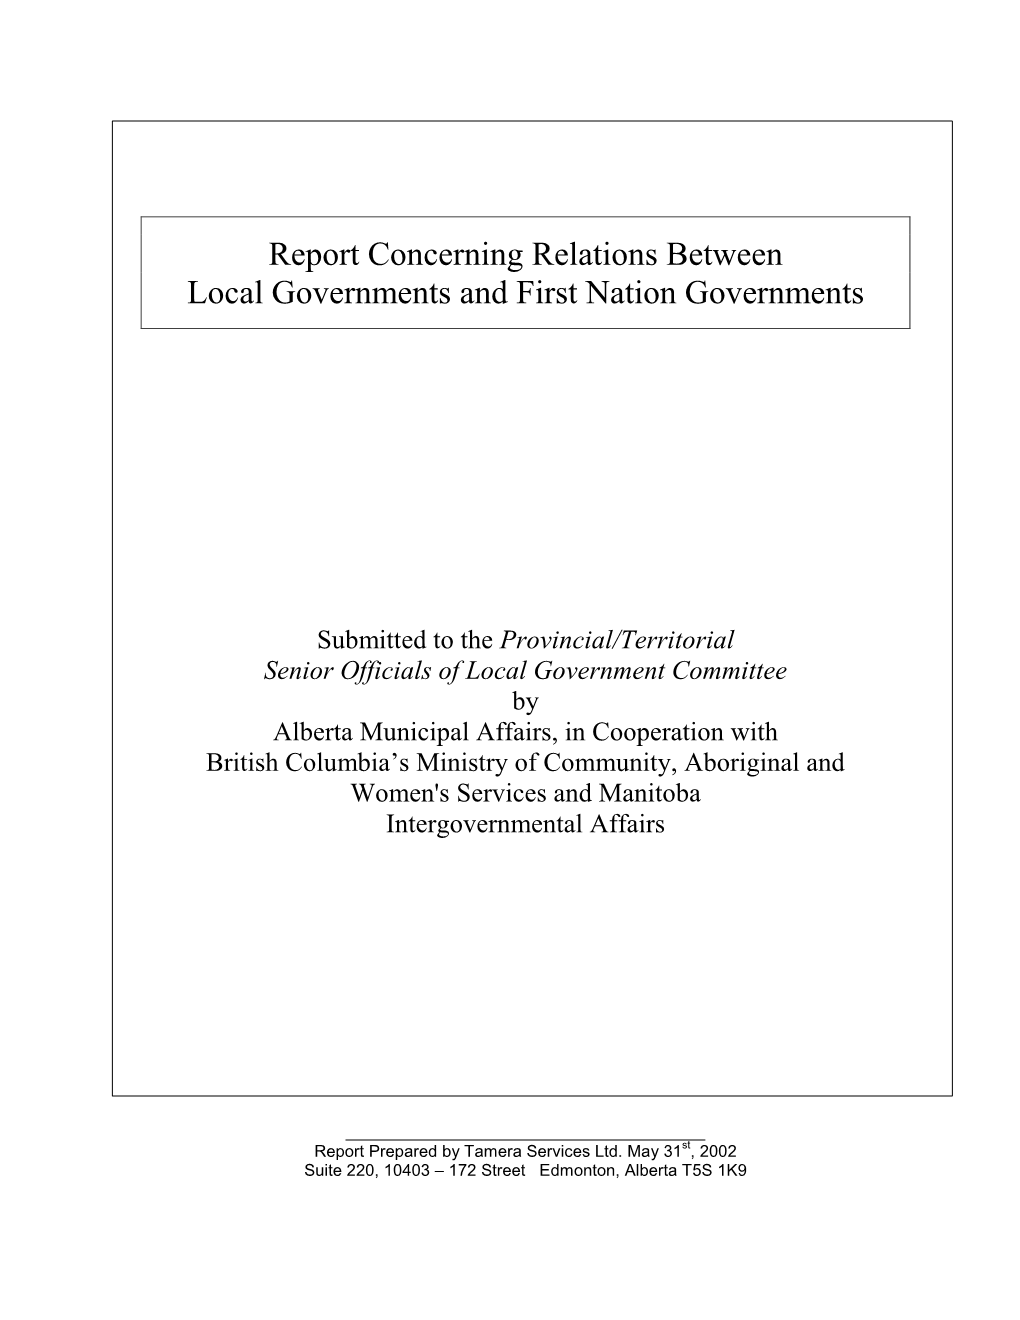 First Nations Government Report